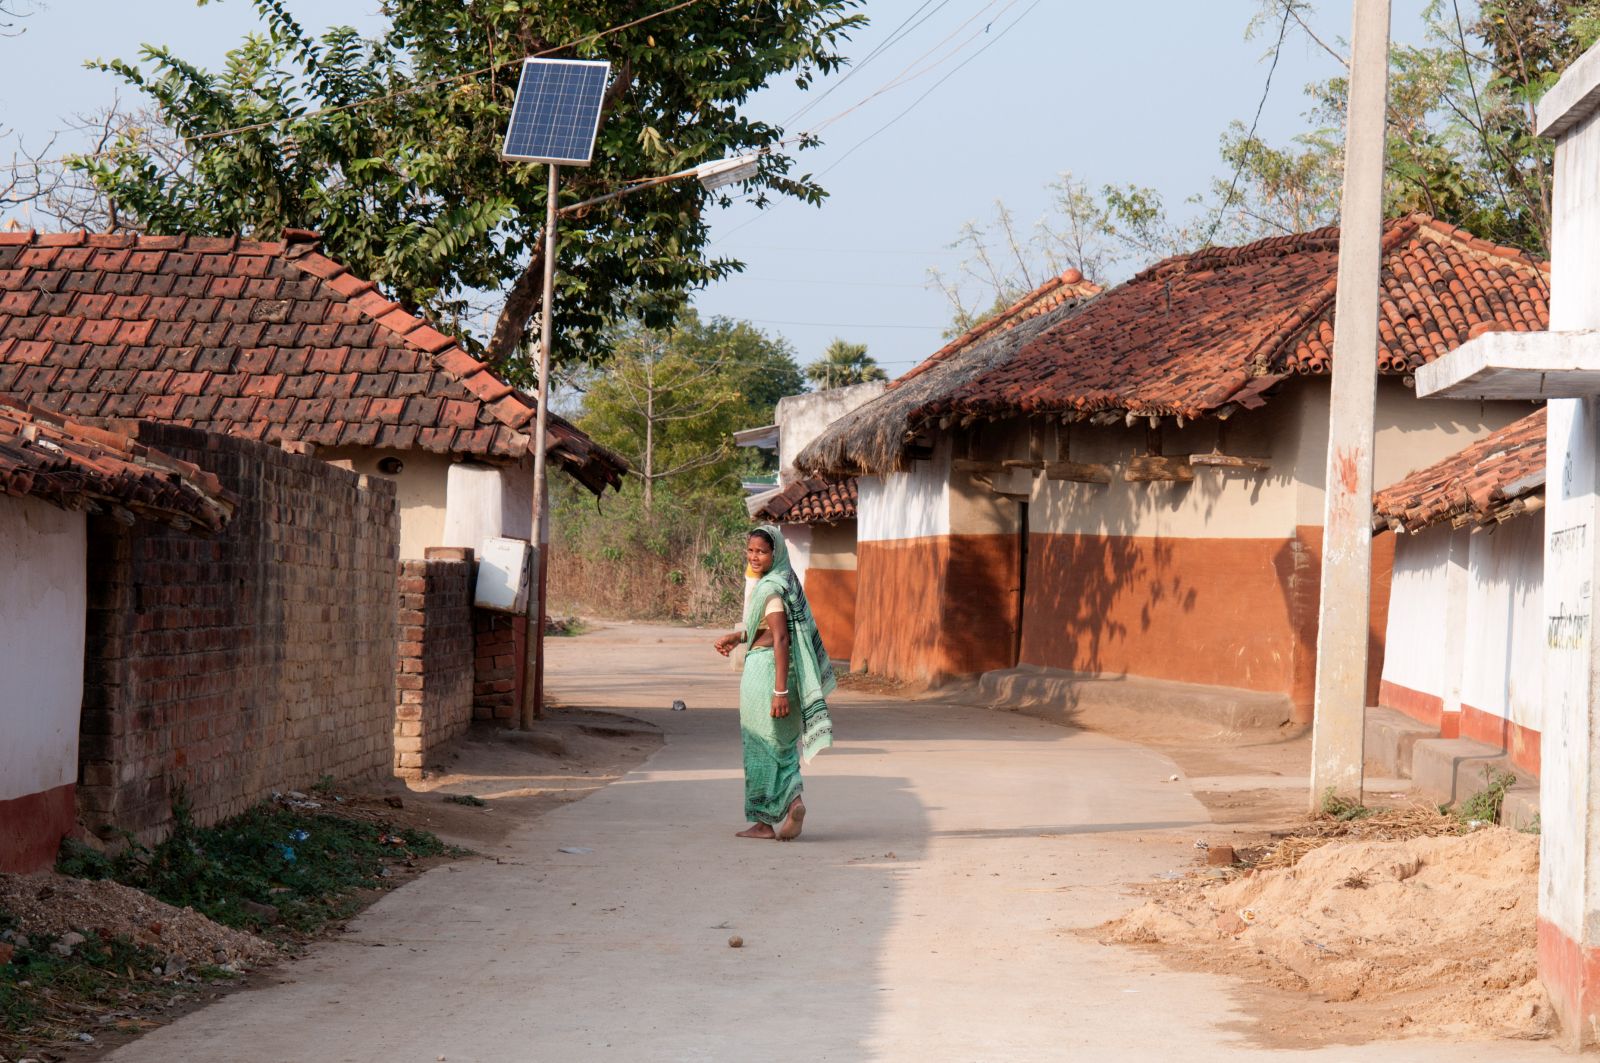 Solar panel in a village in Jharkand state.